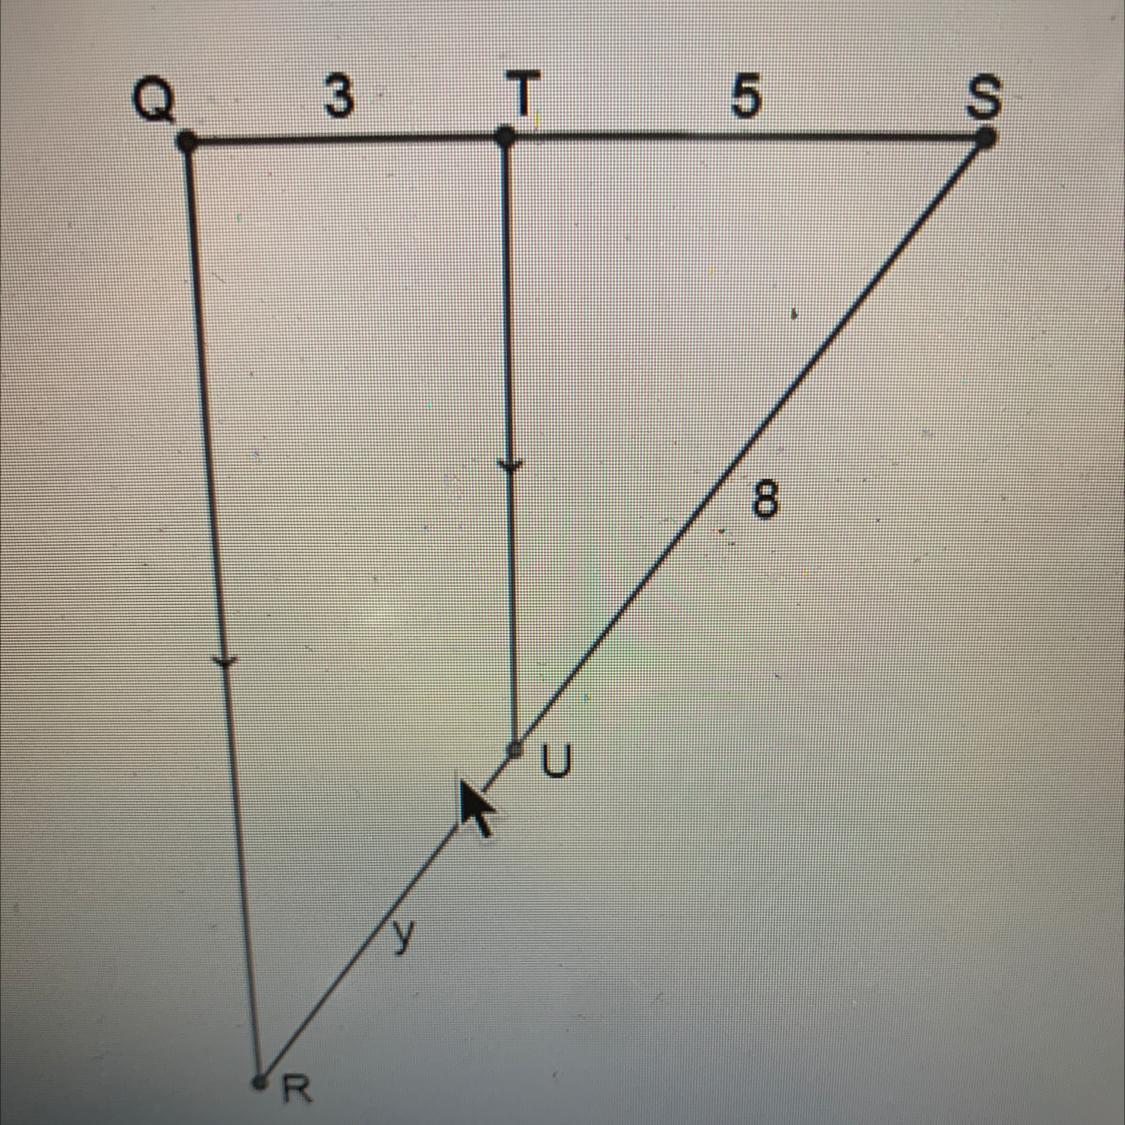 Determine The Value Of Y.Question 14 Options:A) 4.8B) 1.875C) 13.3D) 3